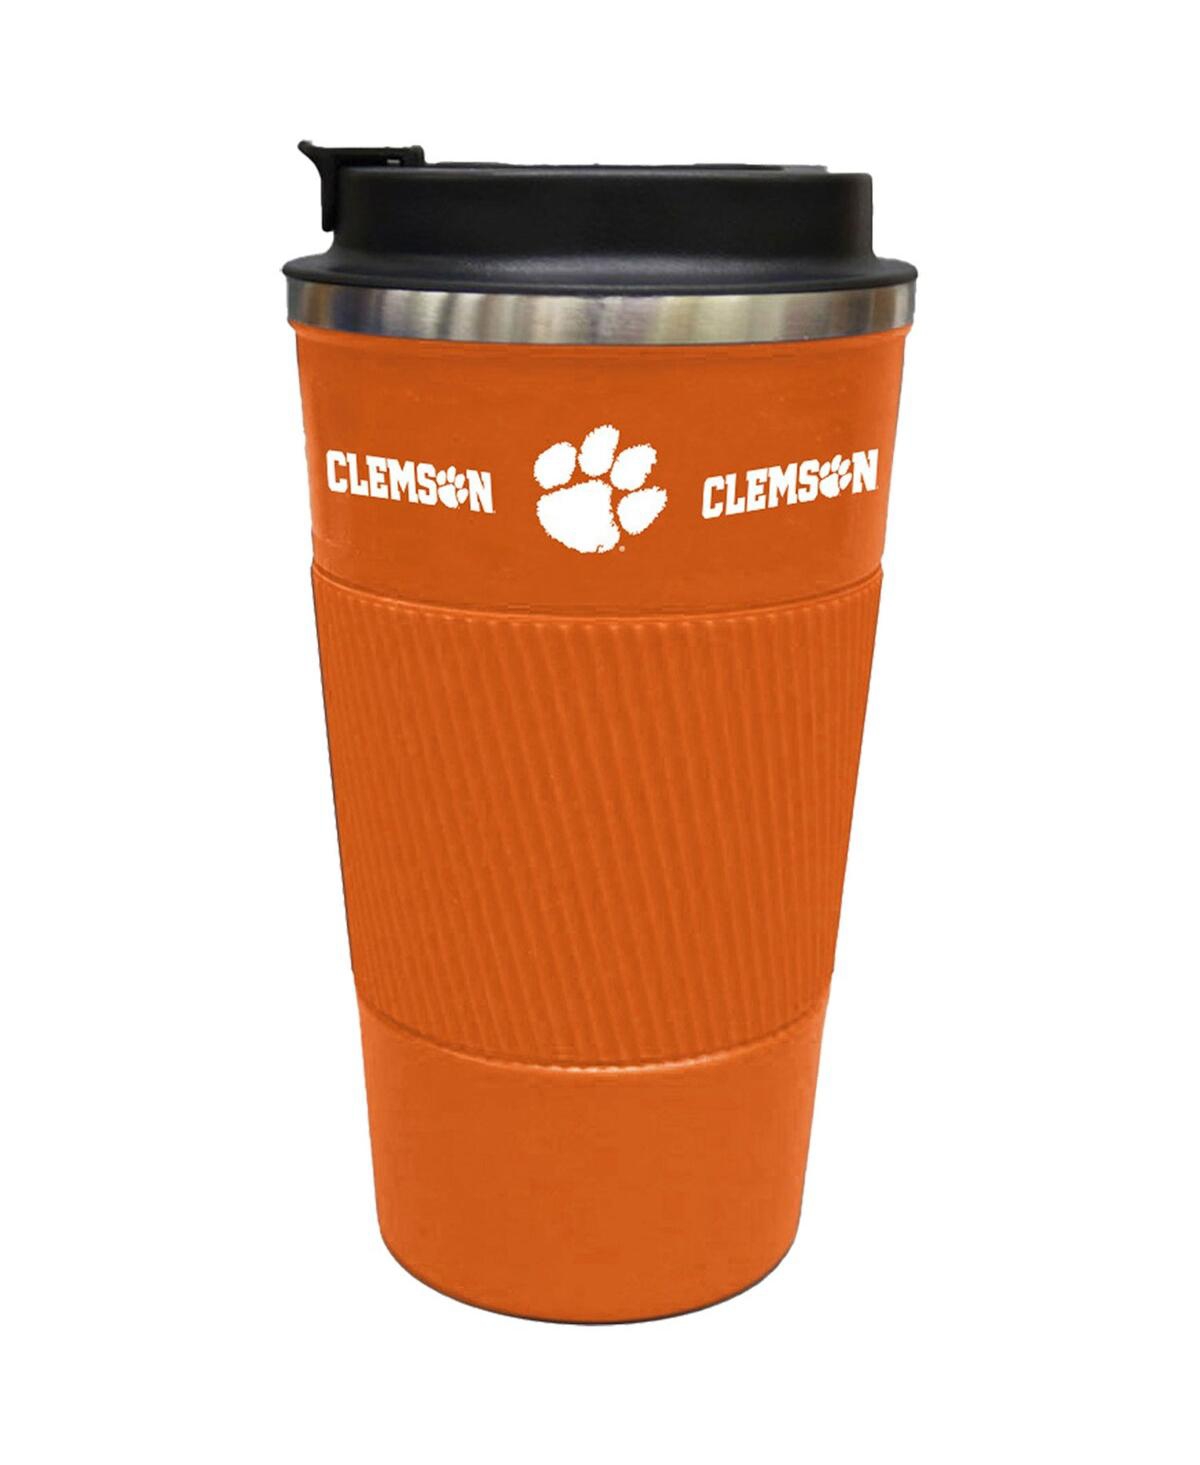 Memory Company Clemson Tigers 18 oz Coffee Tumbler With Silicone Grip In Orange